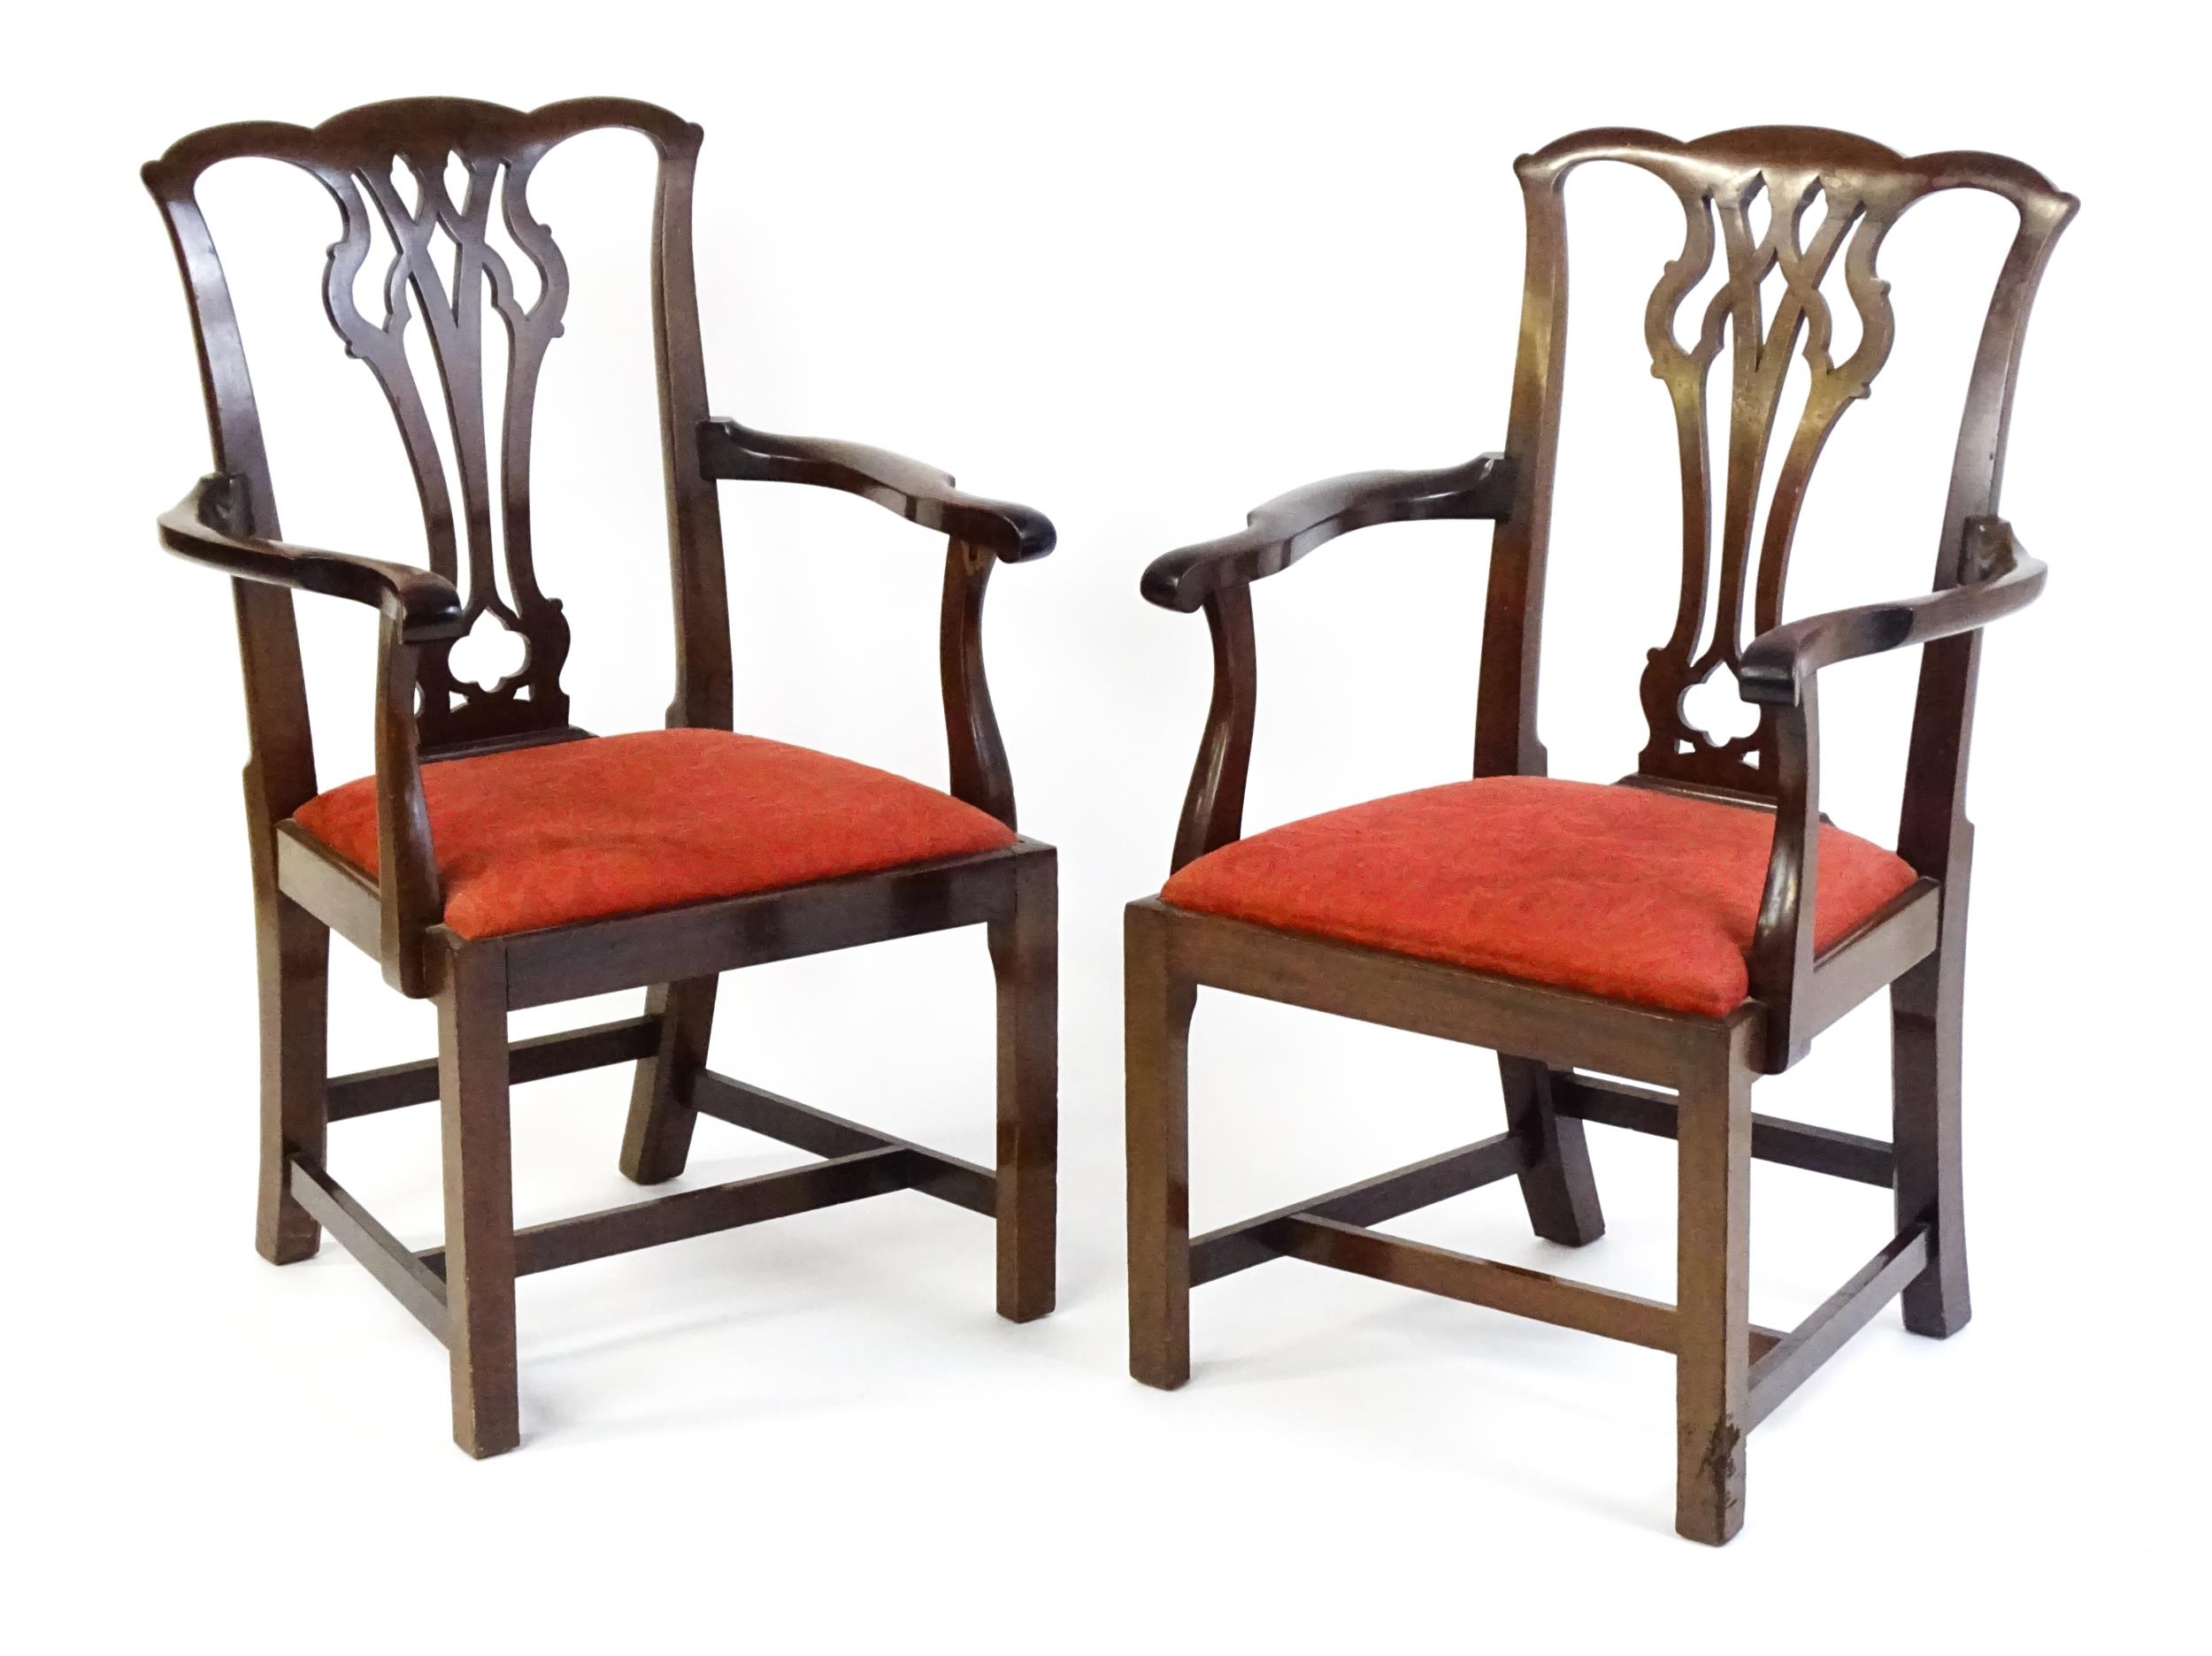 A pair of Chippendale style mahogany elbow chairs with a drop in seat raised on chamfered legs - Image 6 of 7